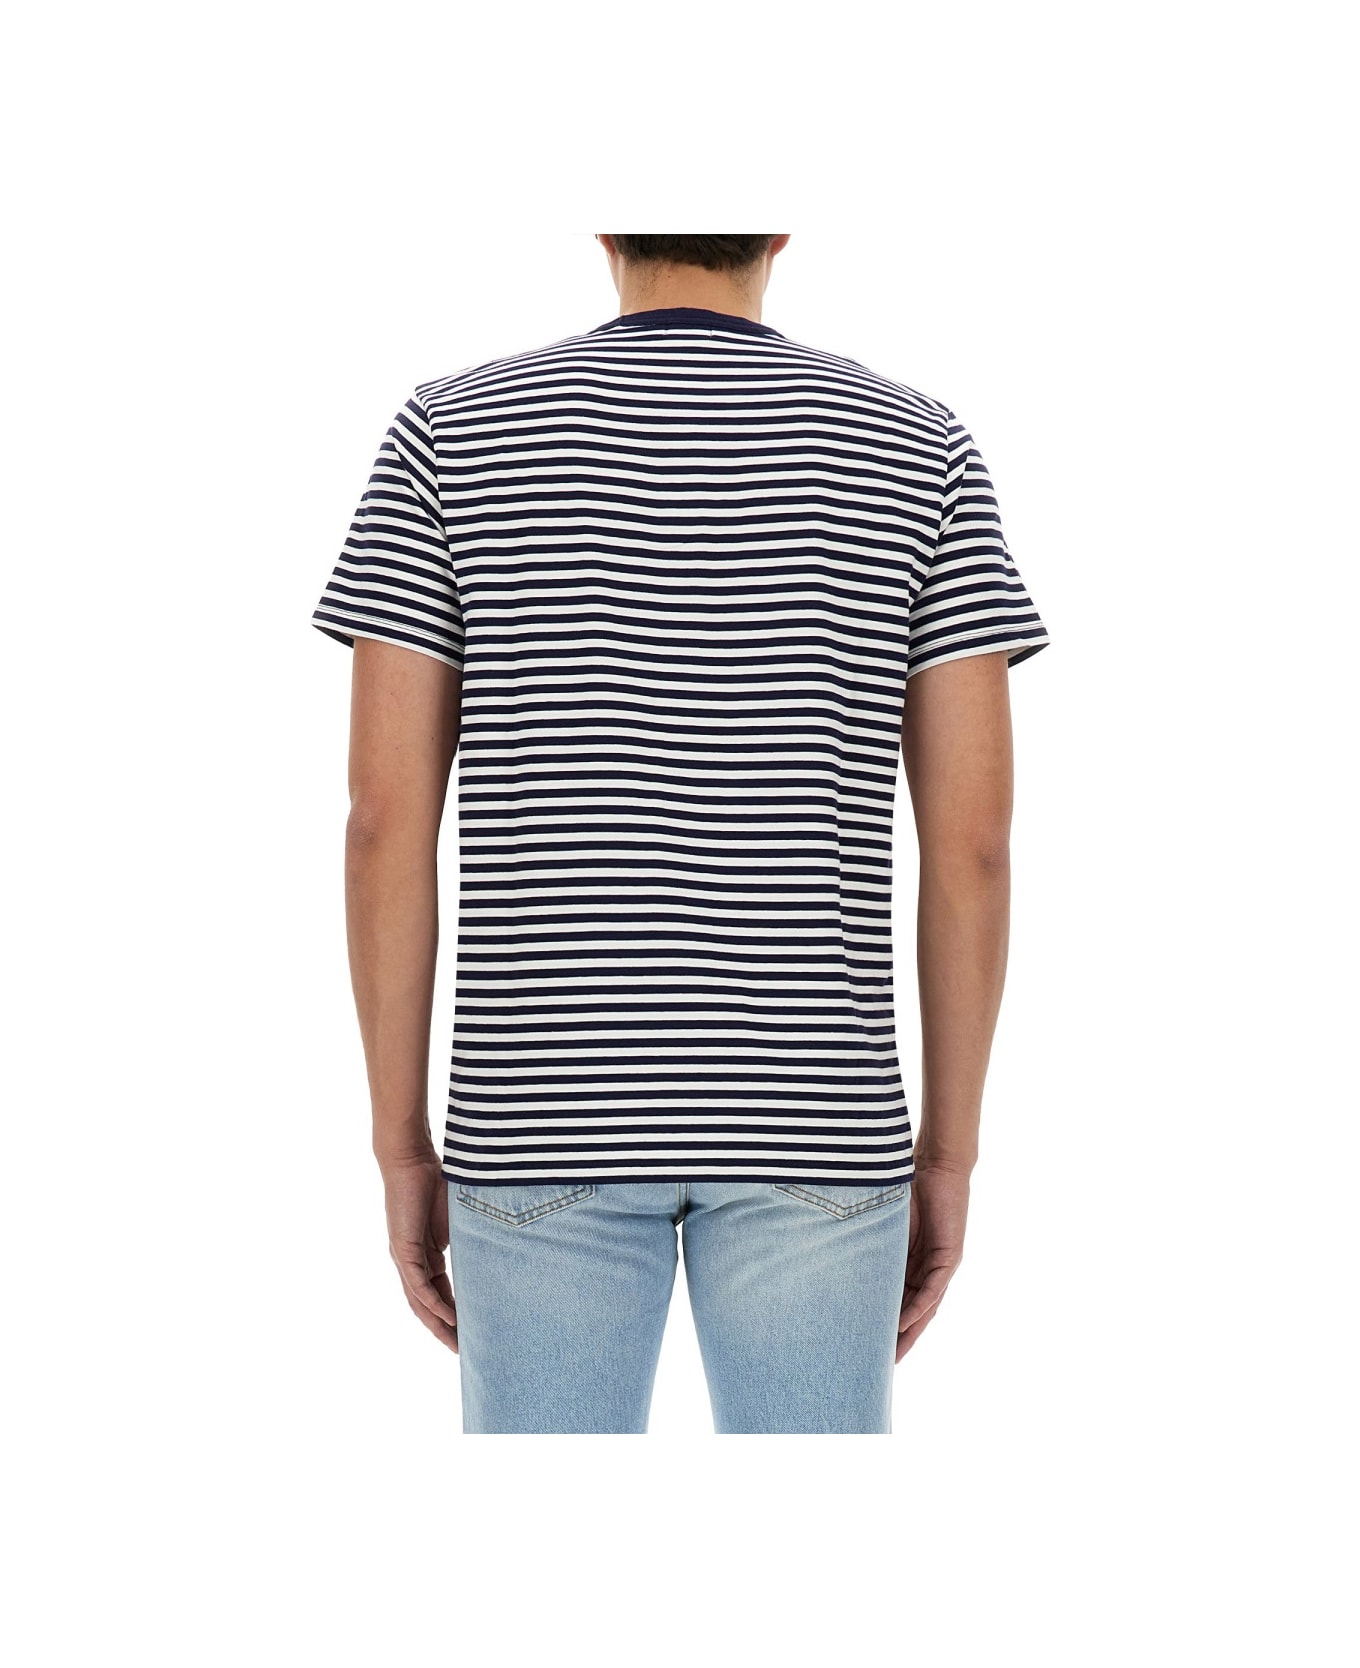 Woolrich Striped T-shirt - Merino blend sweater with V-neck